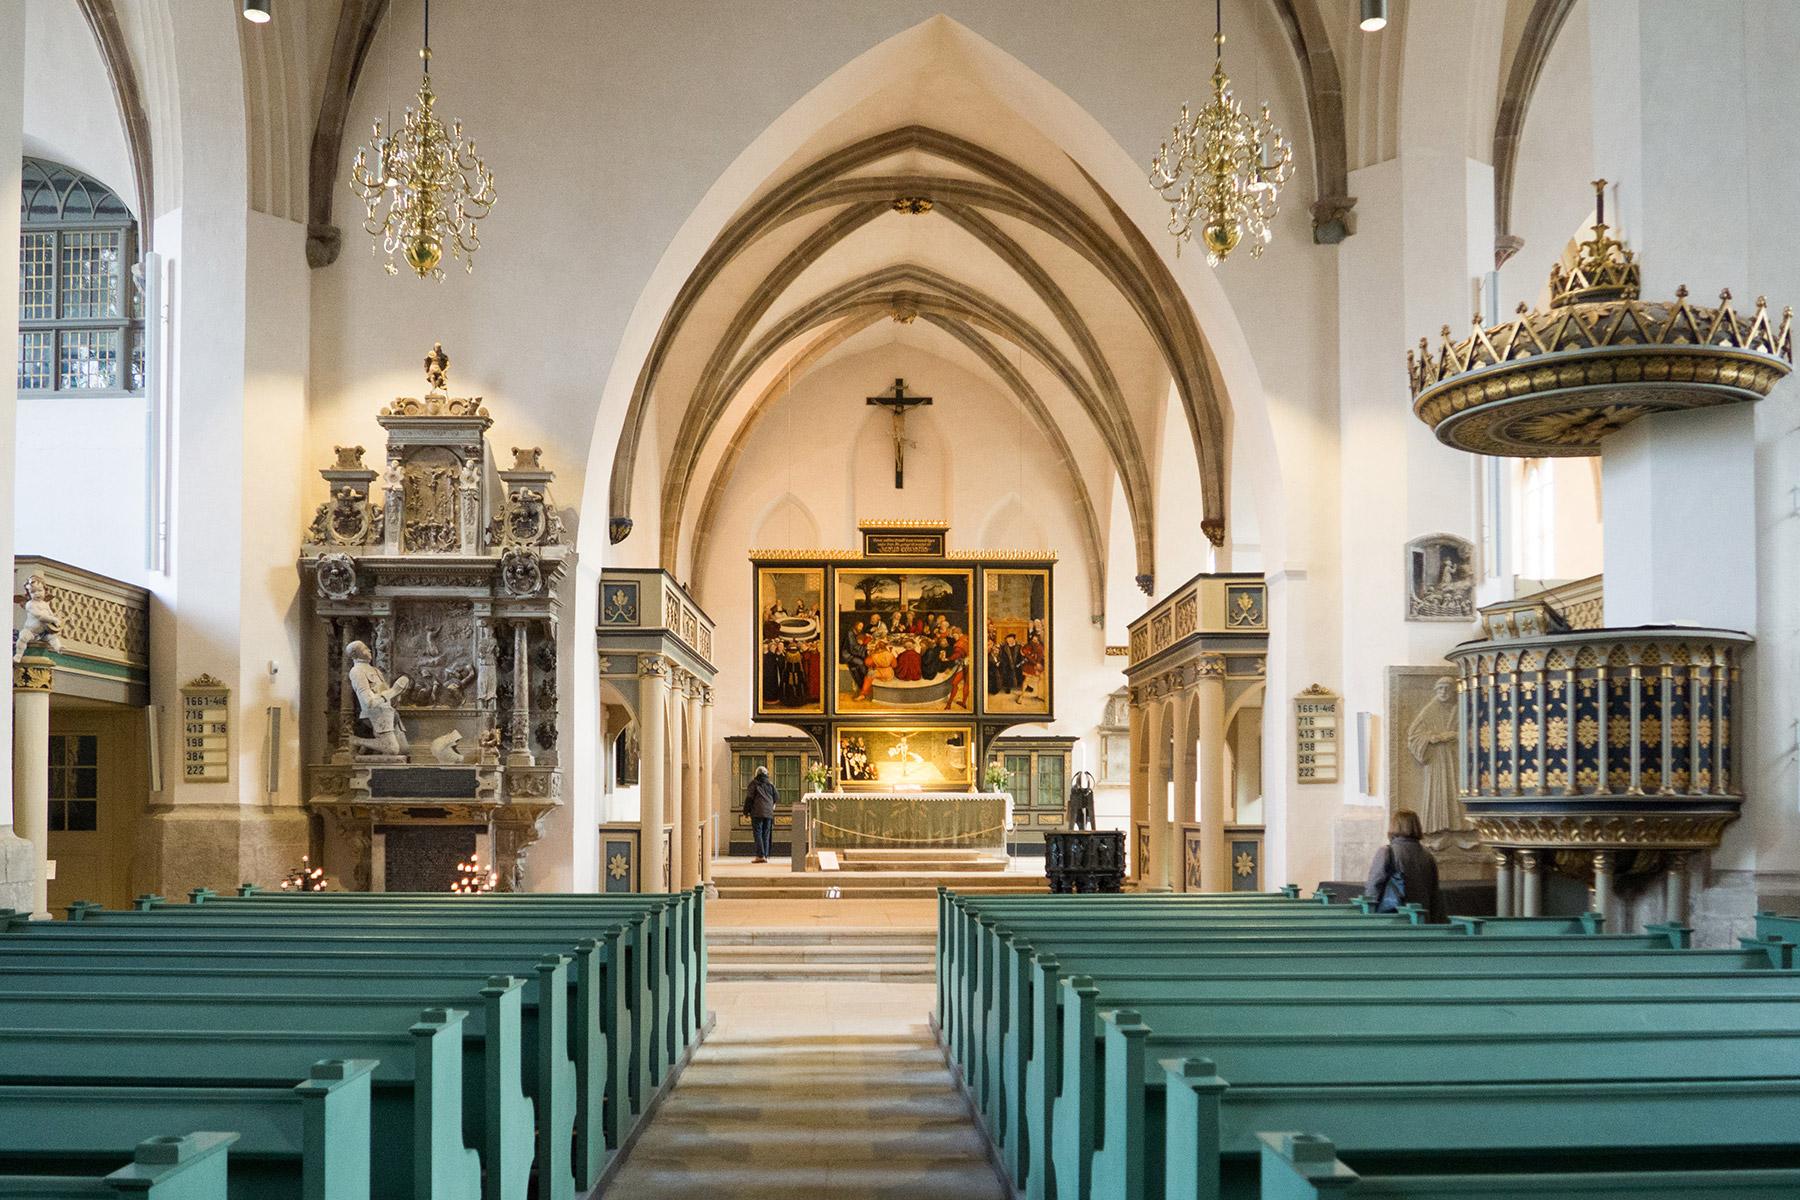 St. Mary's Church in Wittenberg